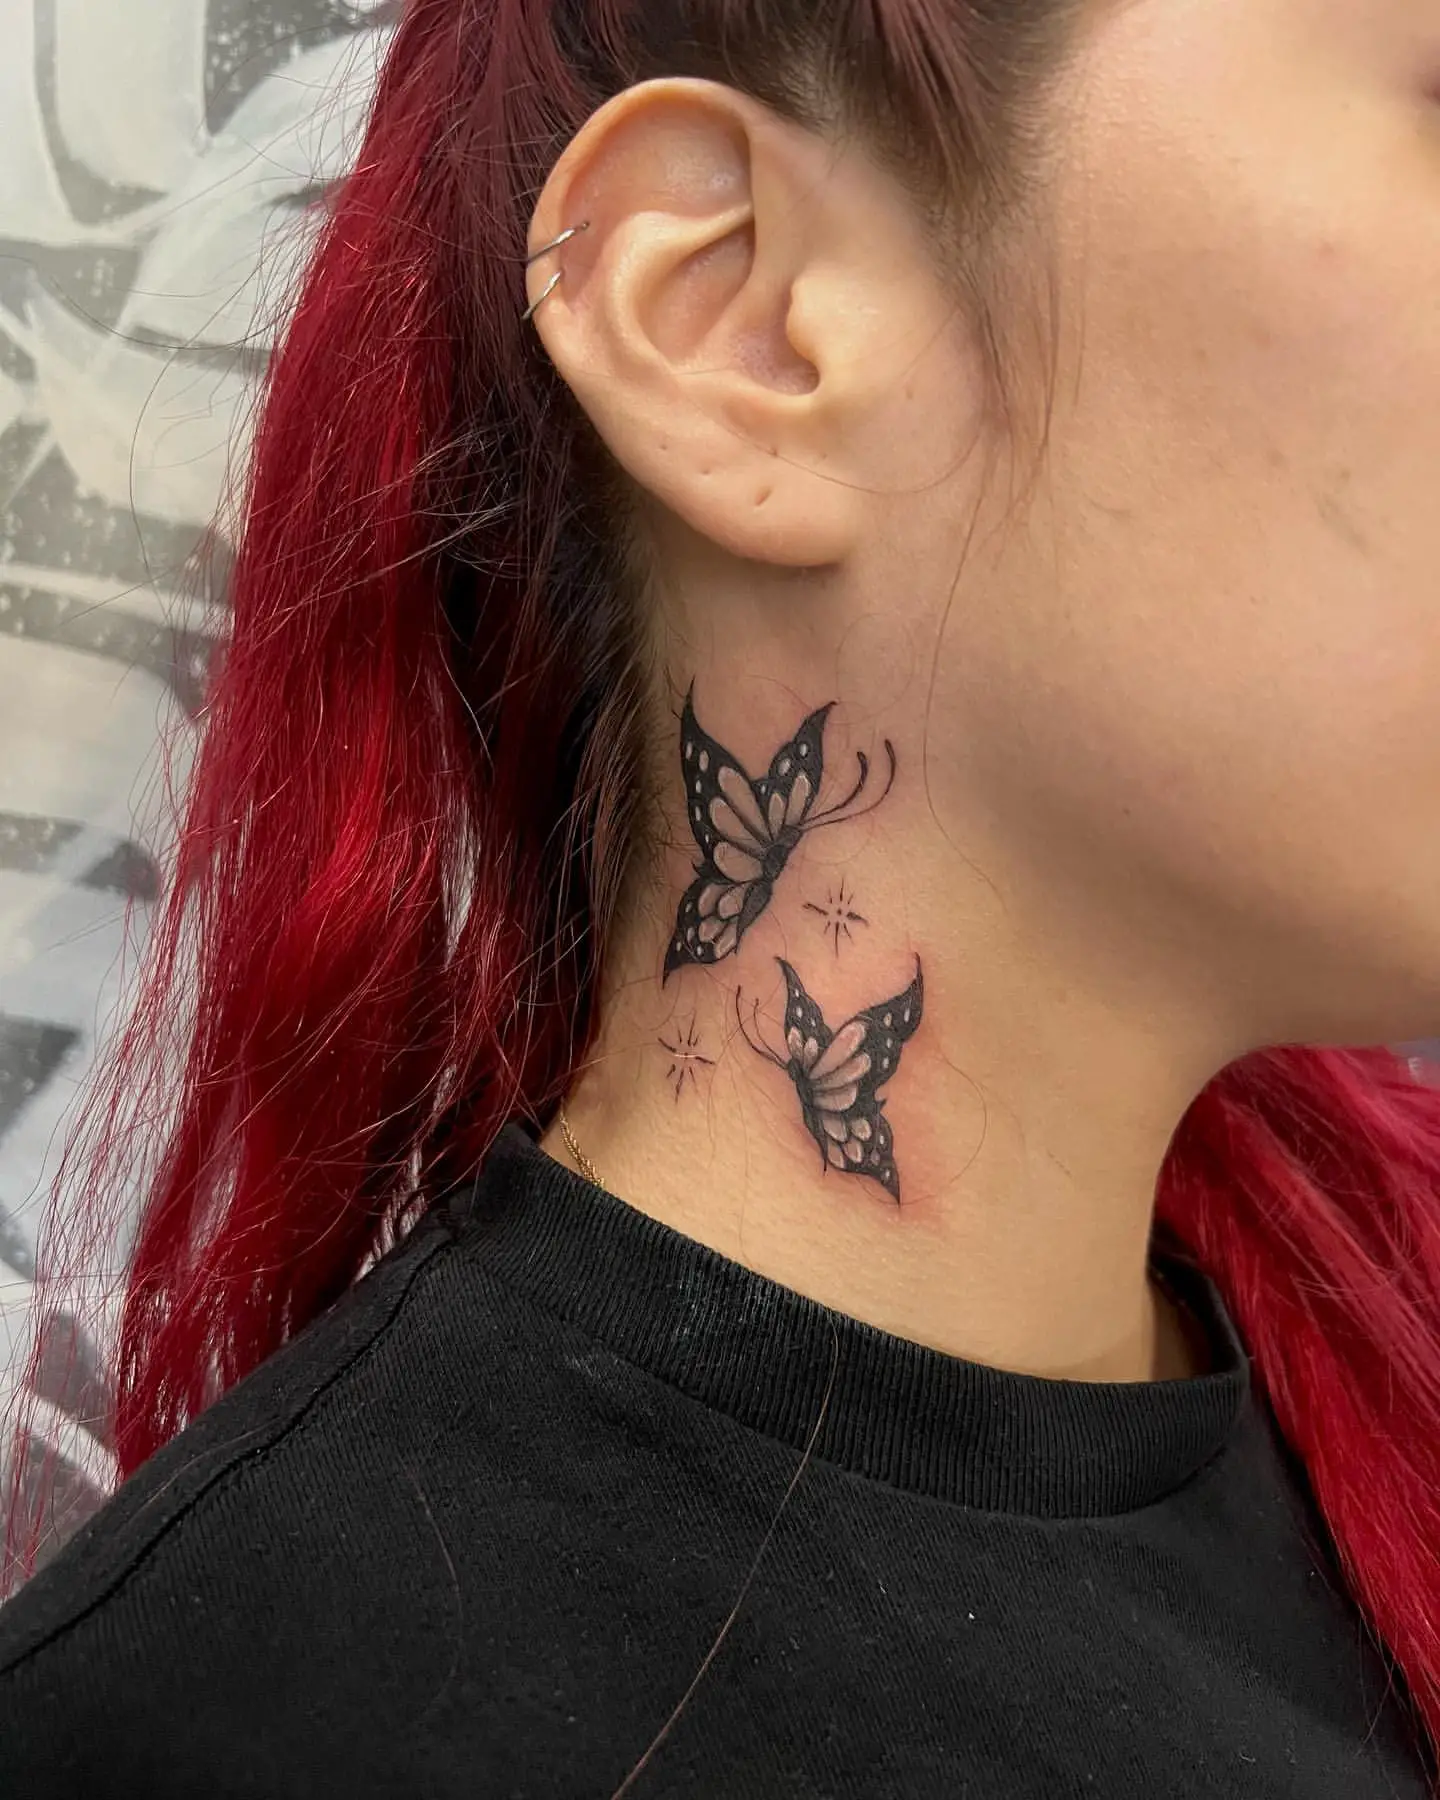 Neck Tattoo Meaning: Investigating the significance and patterns of tattoos on the neck.